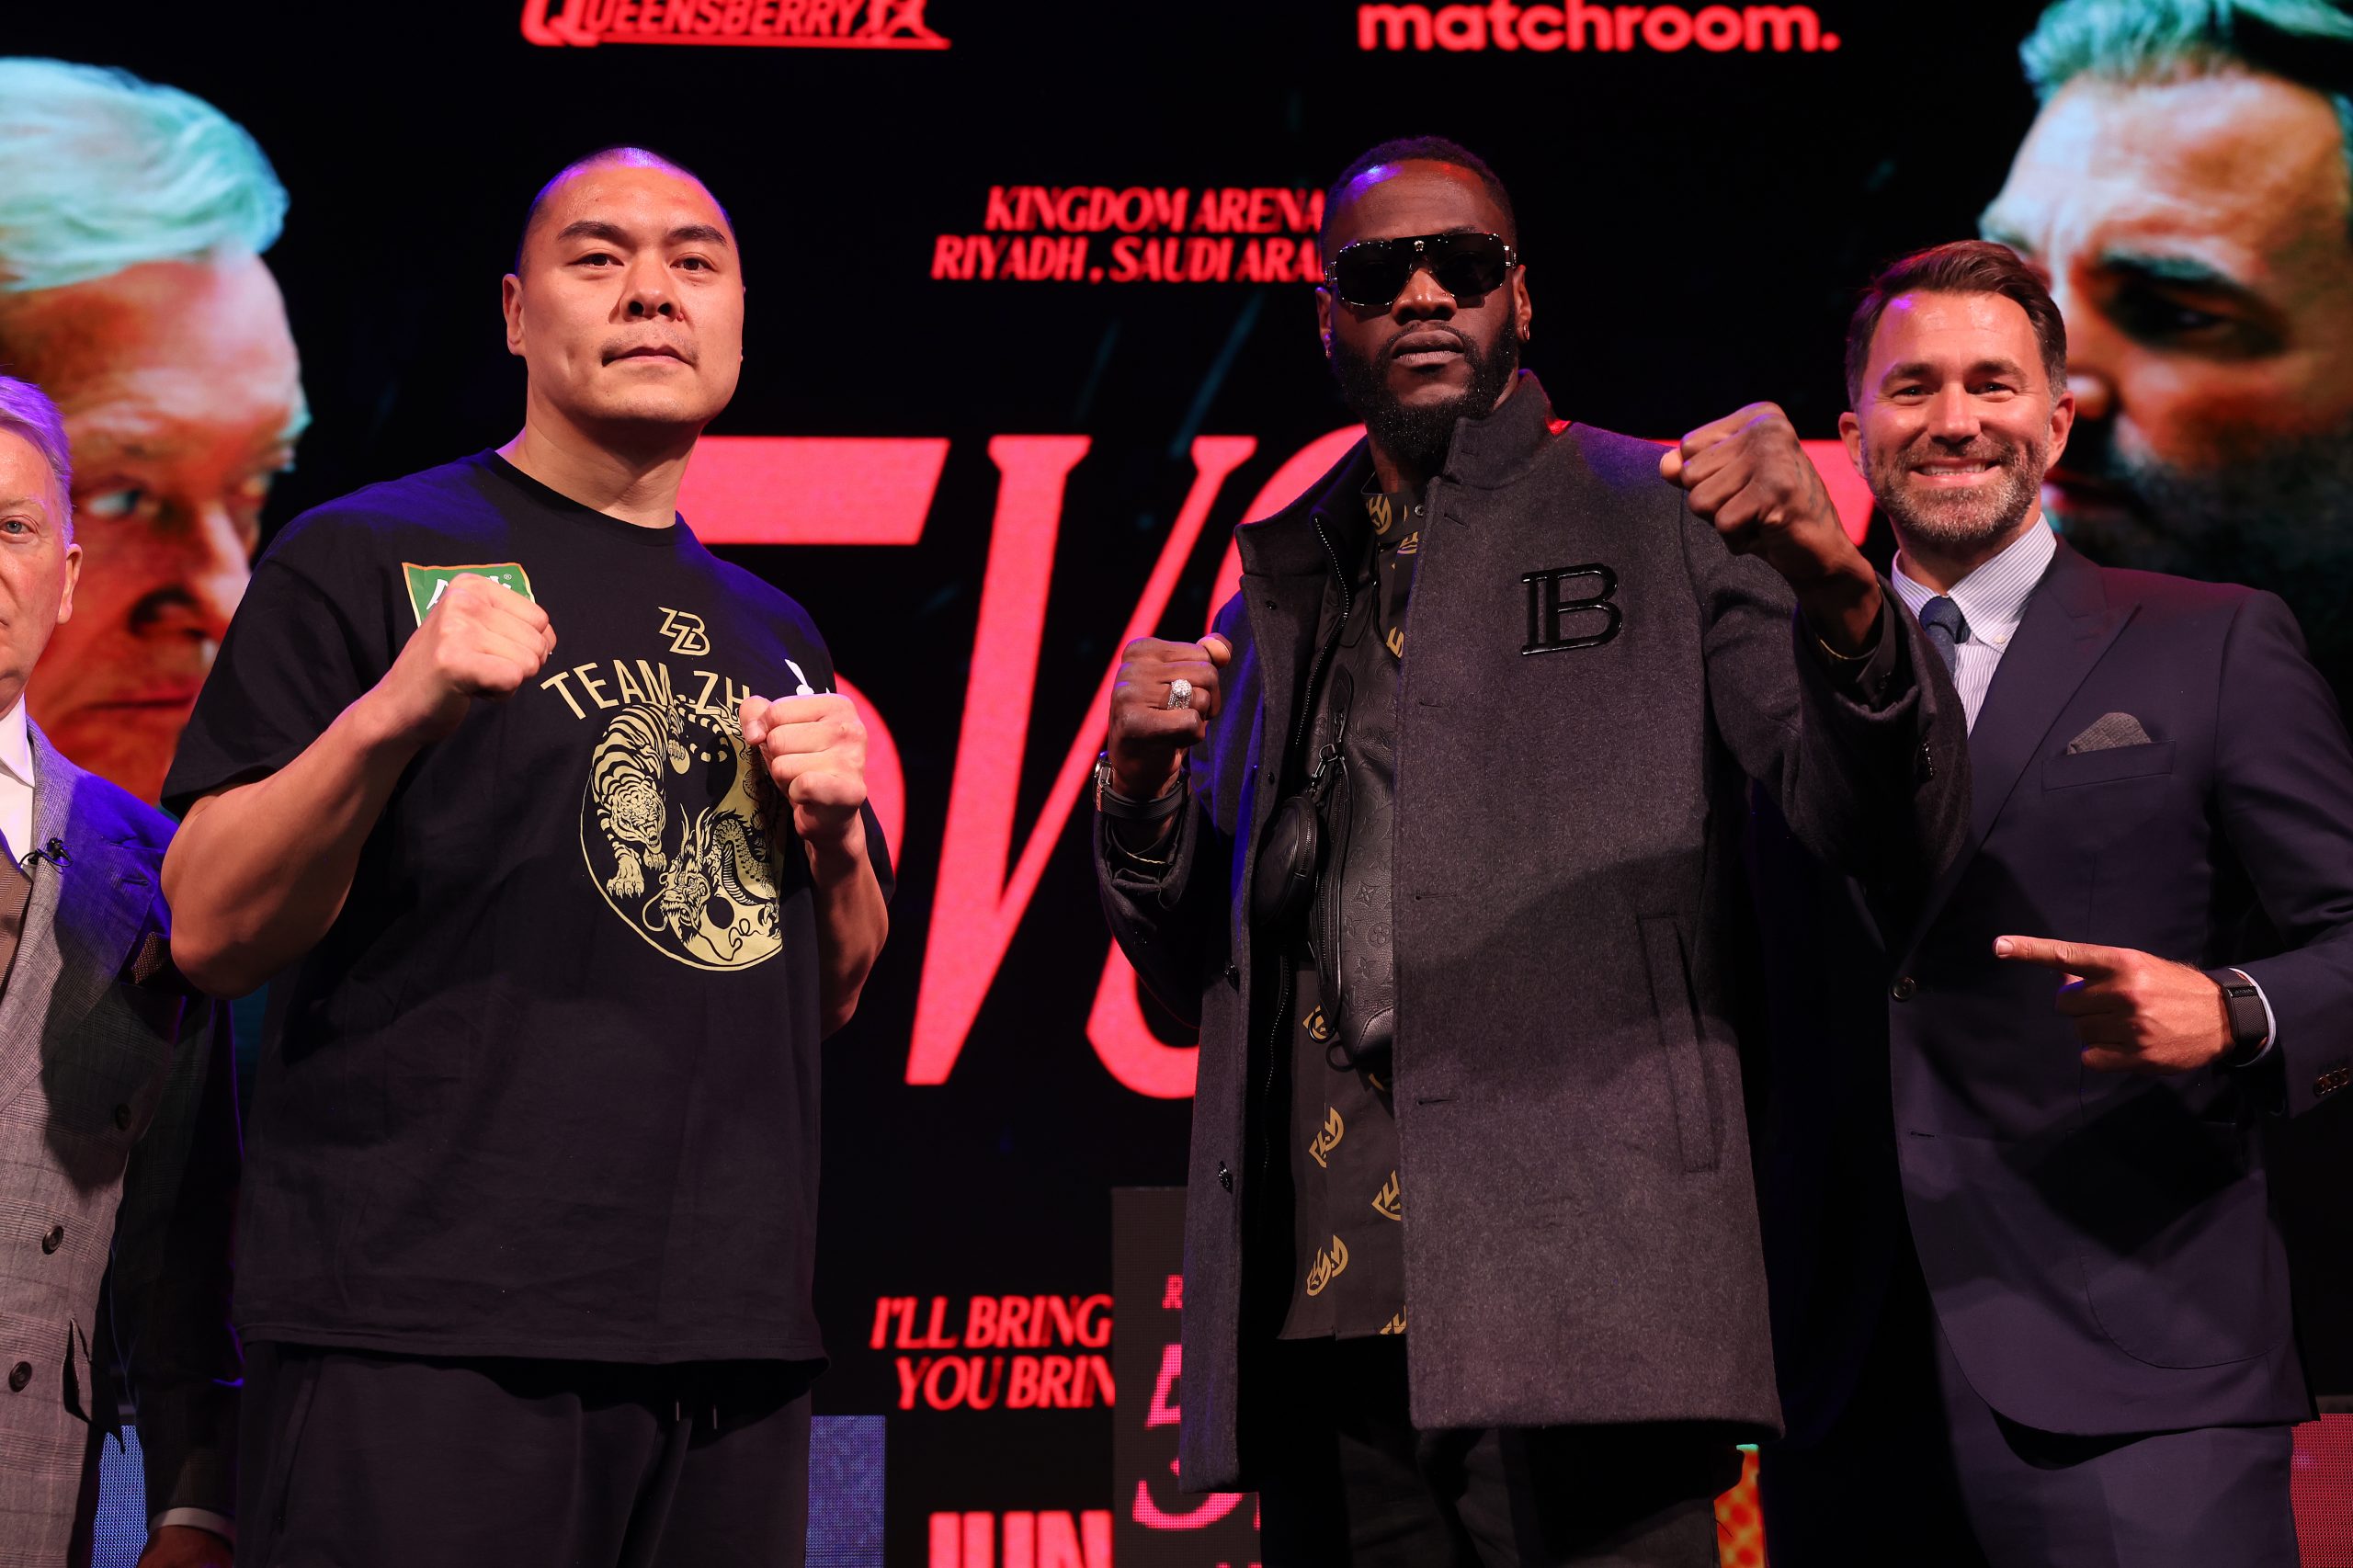 Zhilei Zhang vs Deontay Wilder EXACT ring-walk time: What time will the fight start in UK?